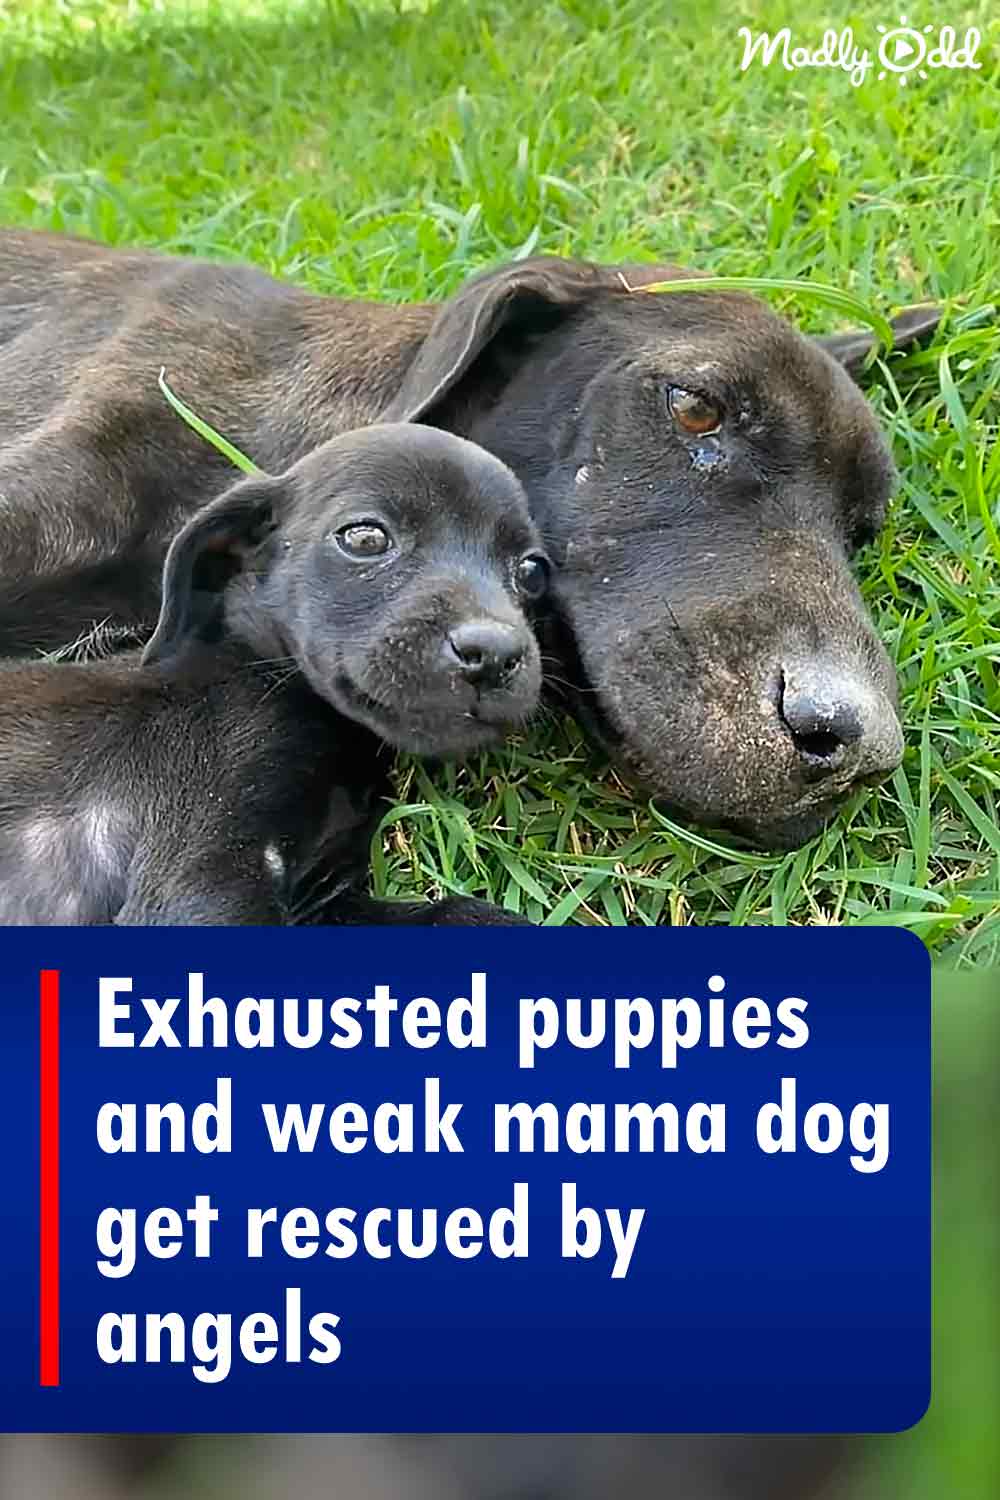 Exhausted puppies and weak mama dog get rescued by angels